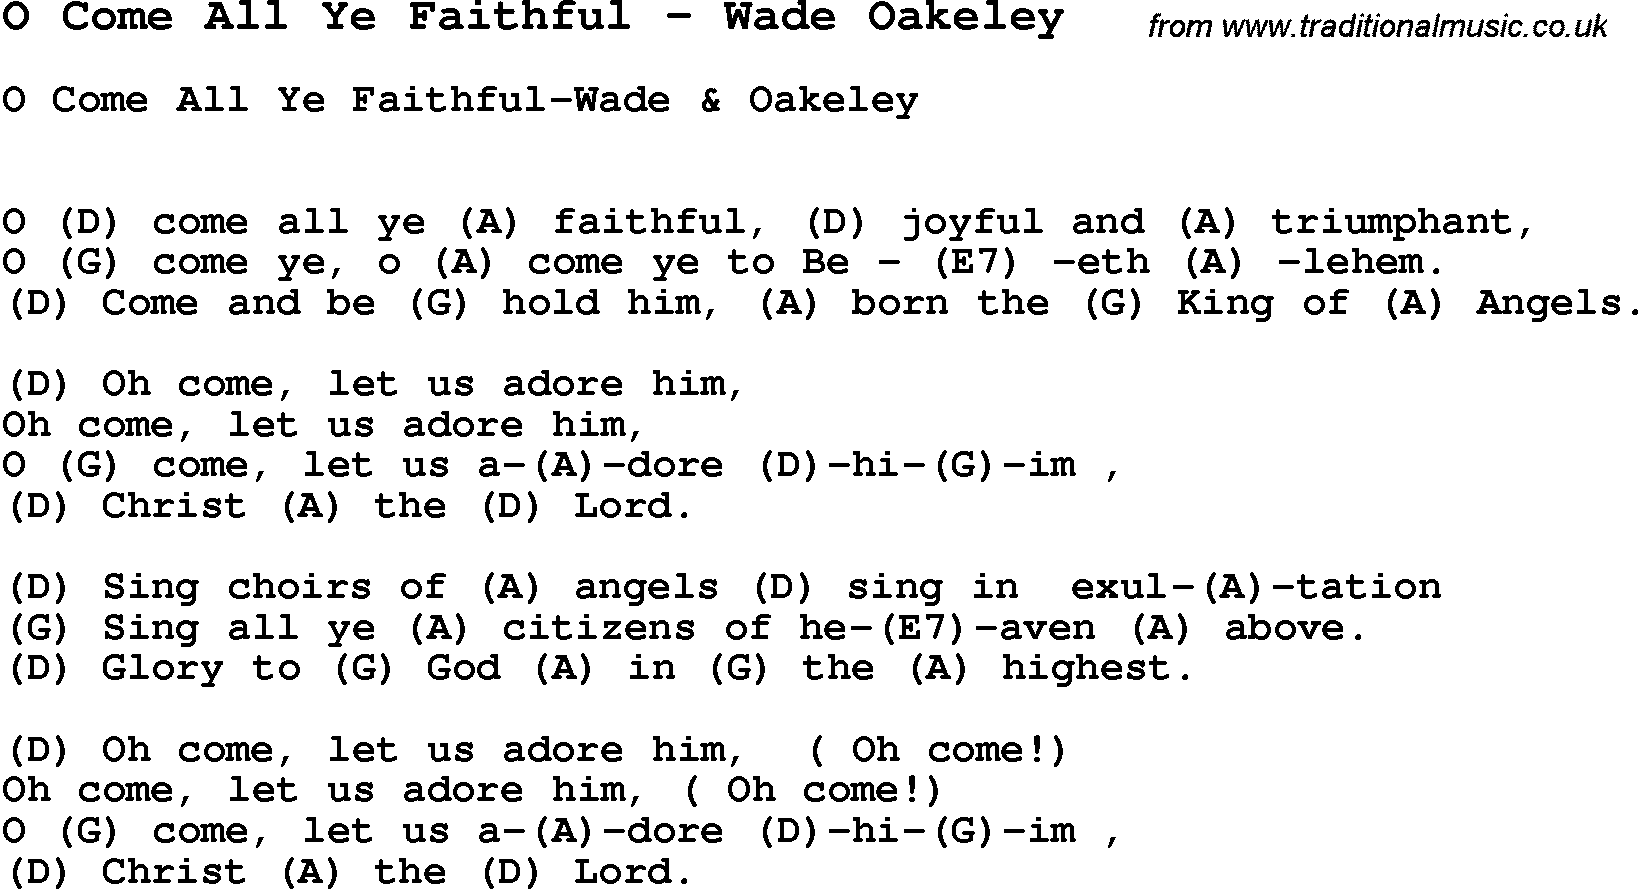 Song O Come All Ye Faithful by Wade Oakeley, with lyrics for vocal performance and accompaniment chords for Ukulele, Guitar Banjo etc.